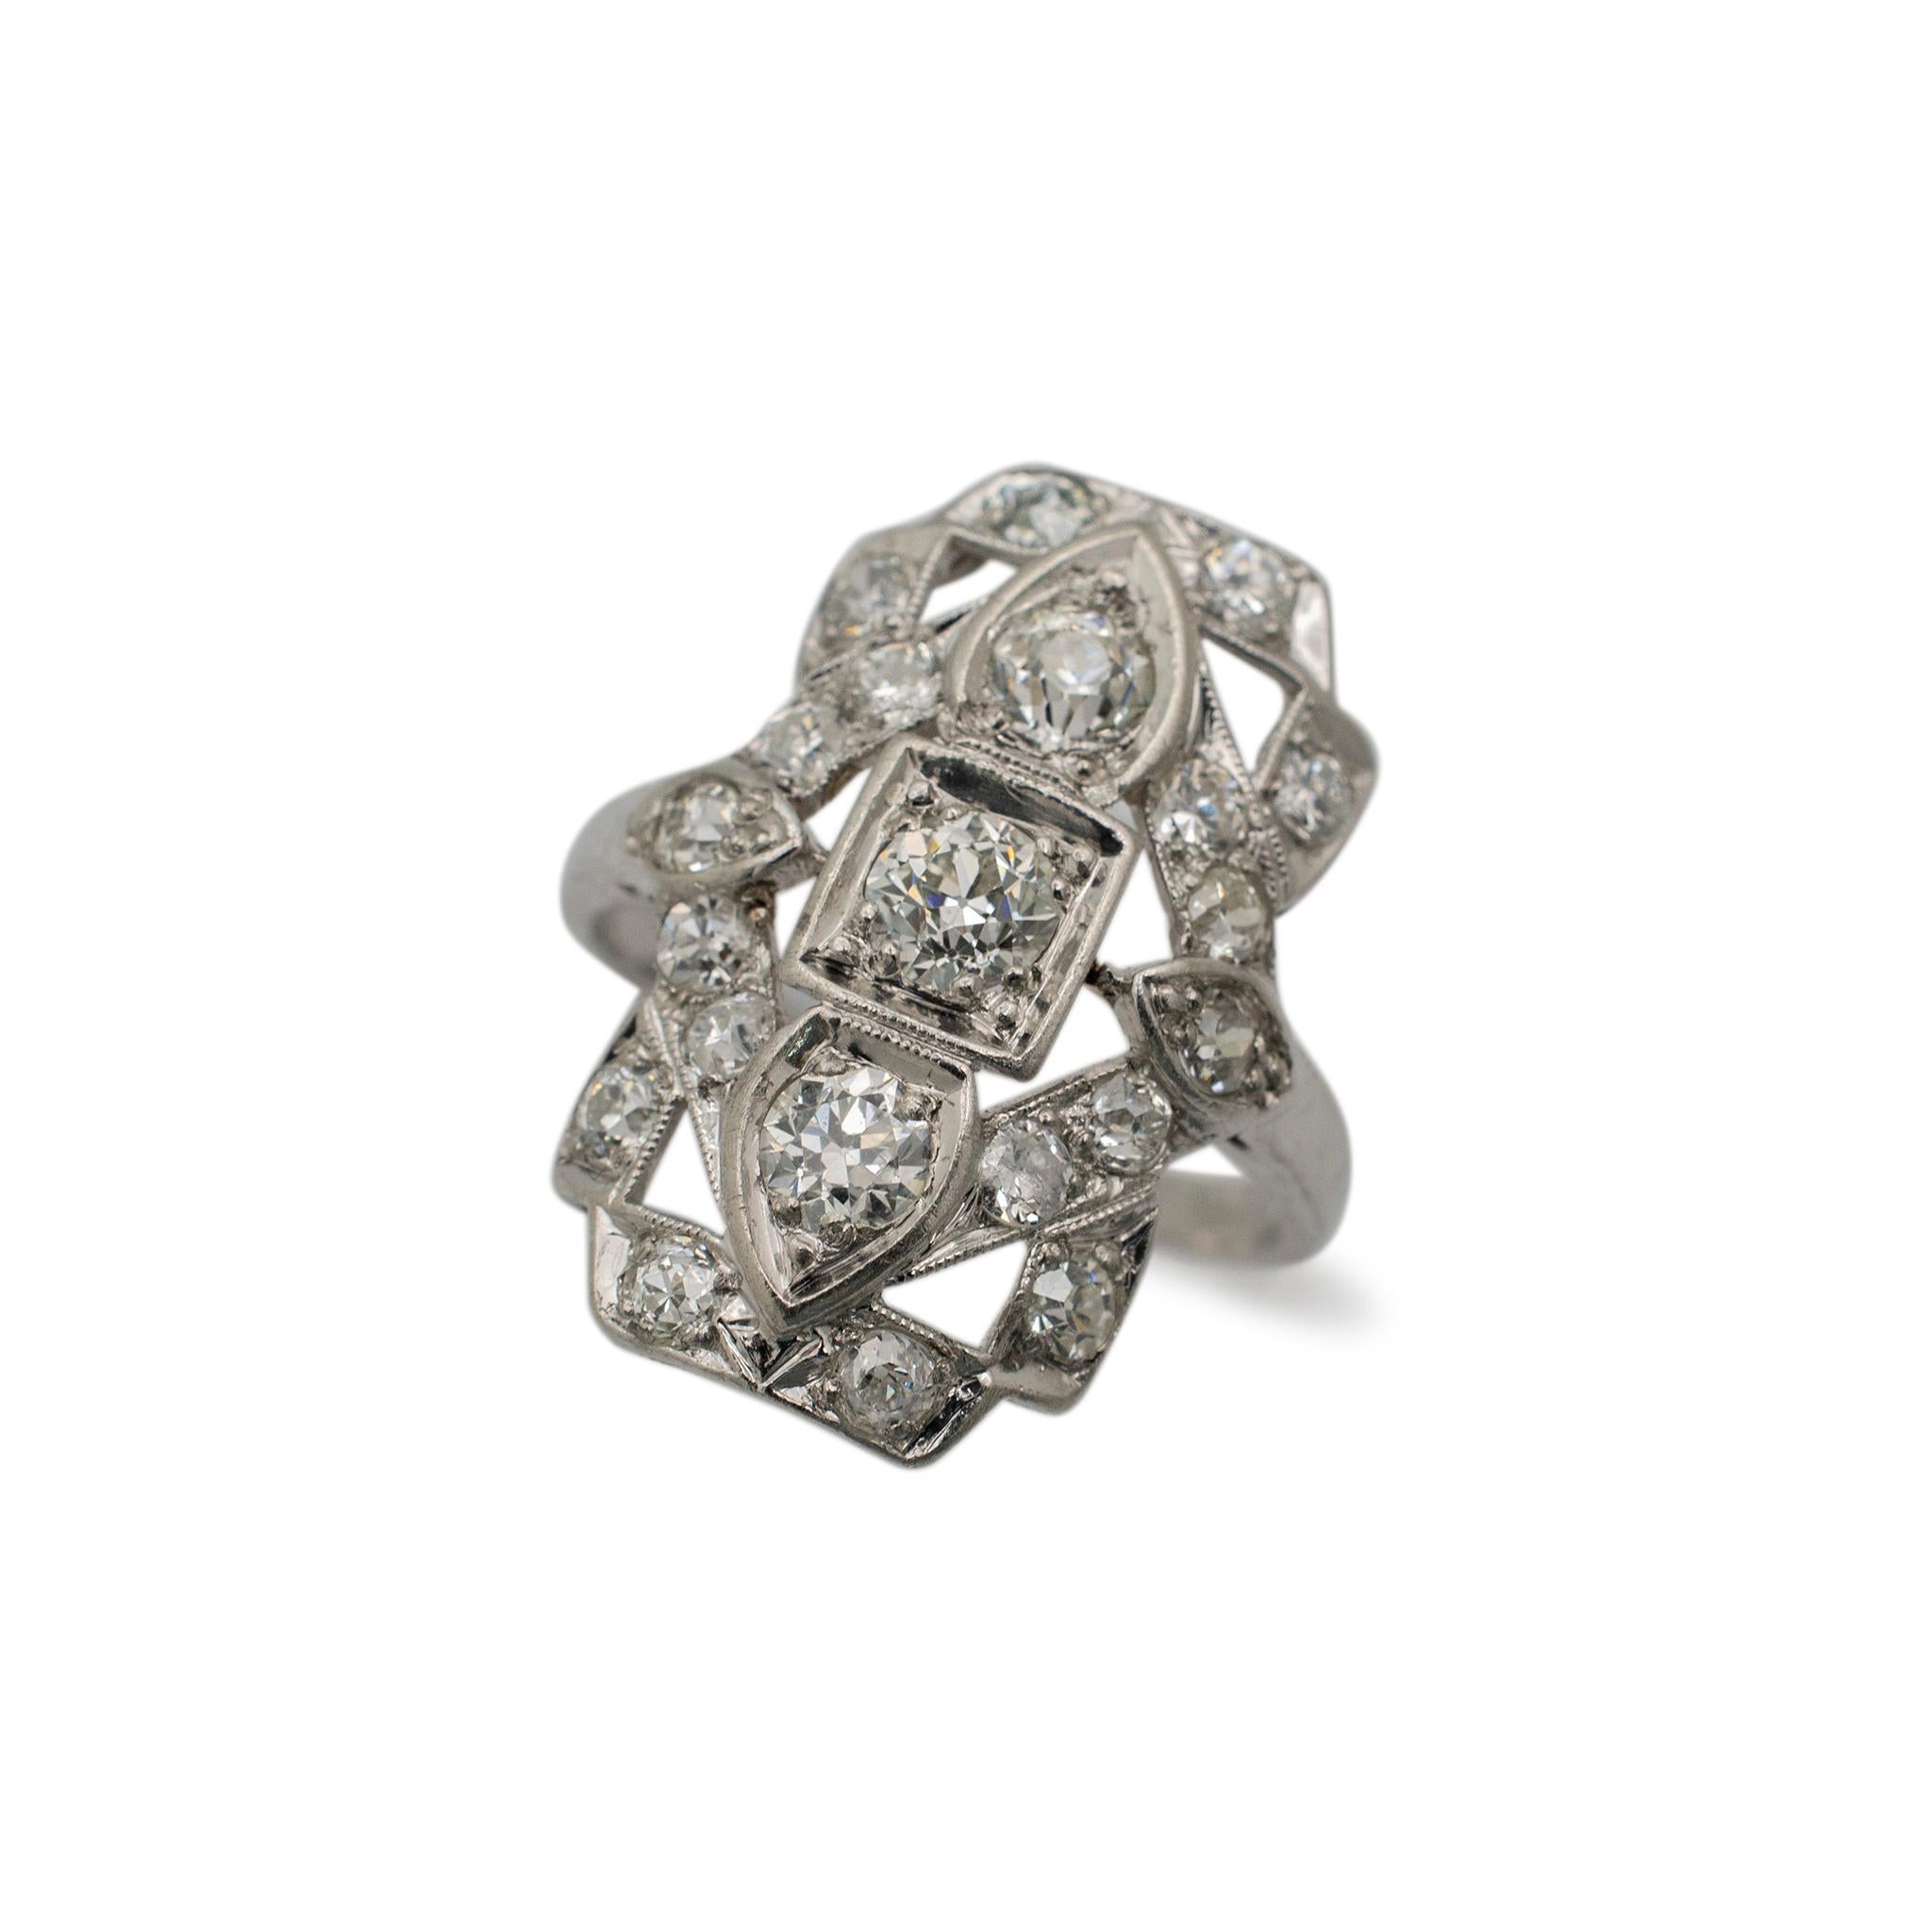 Gender: Ladies

Metal Type: Platinum

Ring Size: 4.5

Weight: 4.36 grams

Shank Maximum Width: 2.00mm

Ladies handmade filigreed platinum, diamond art-deco (1920-1930) cocktail ring with a half-round shank.

The metal was tested and determined to be